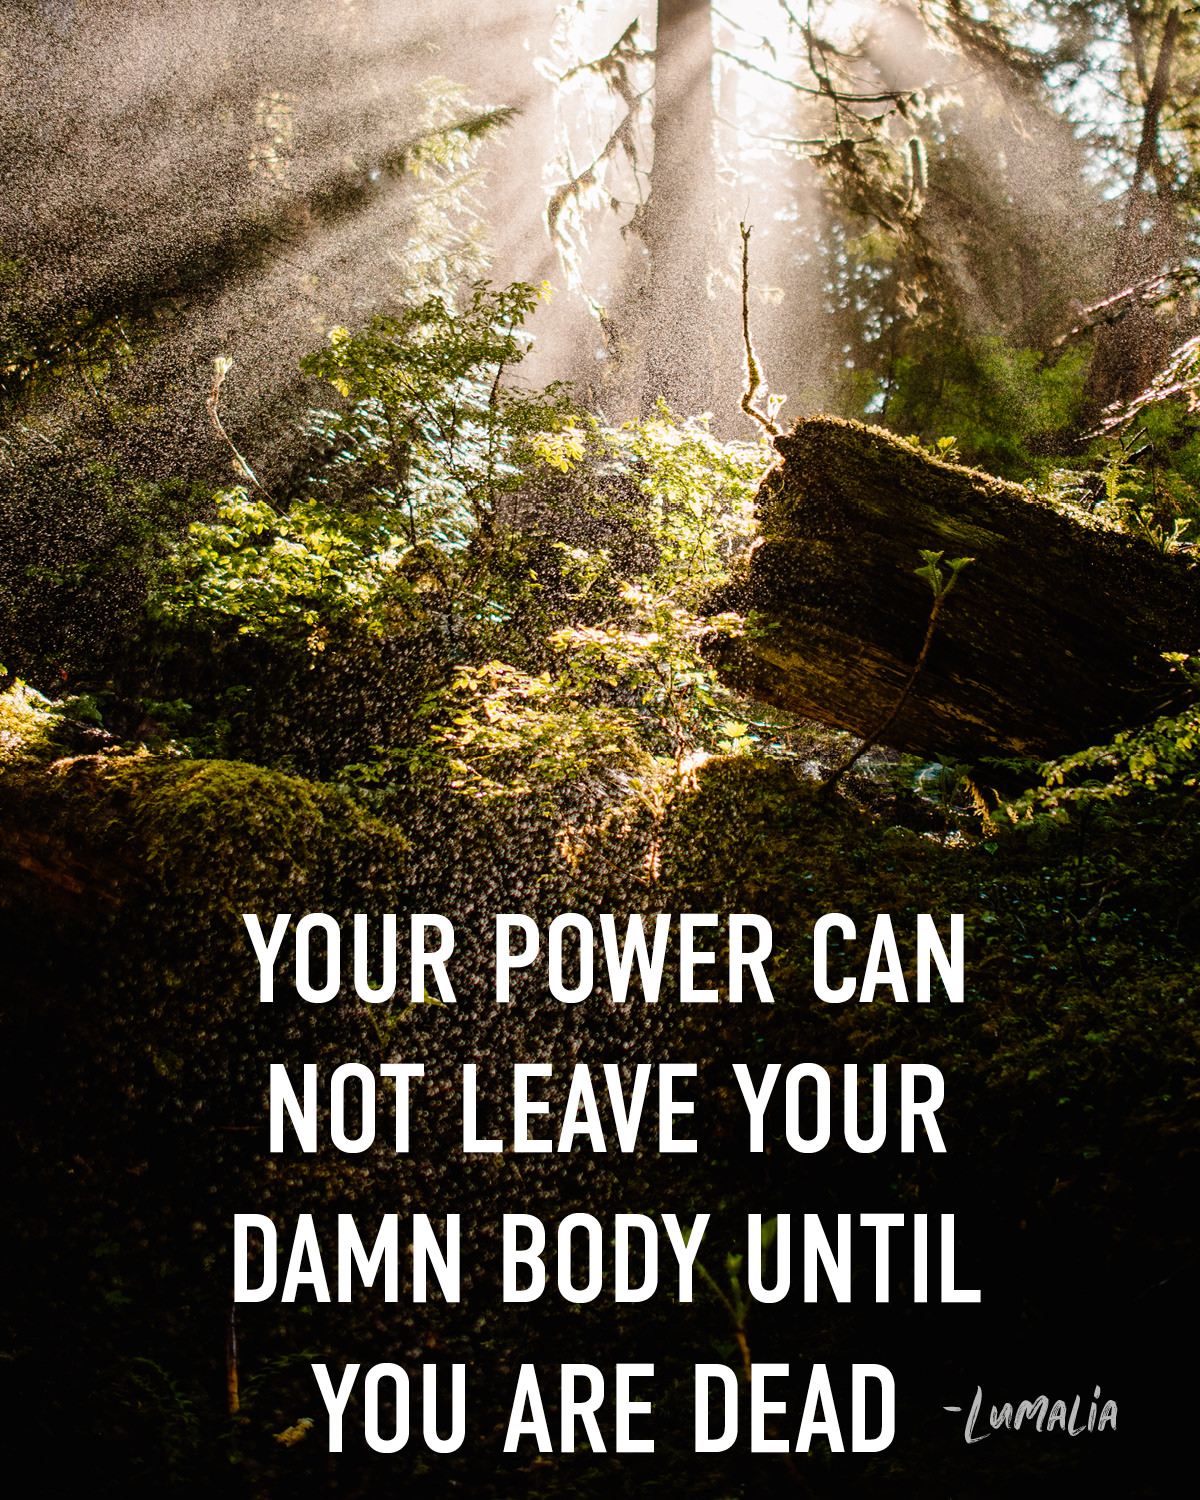 YOUR POWER CANNOT LEAVE YOUR DAMN BODY UNTIL YOU ARE DEAD